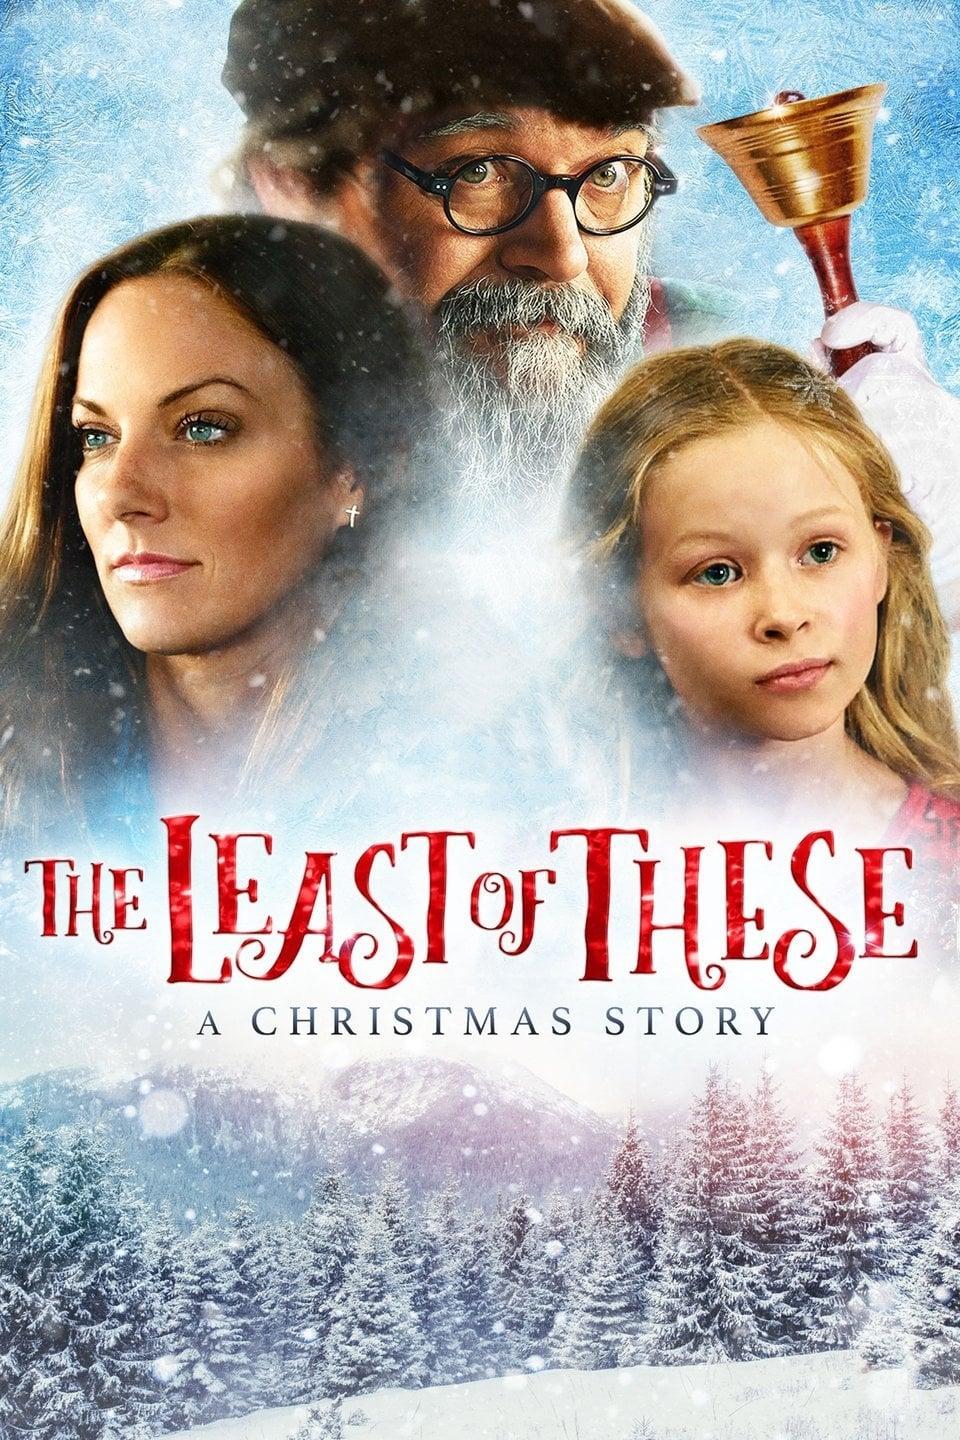 The Least of These: A Christmas Story poster